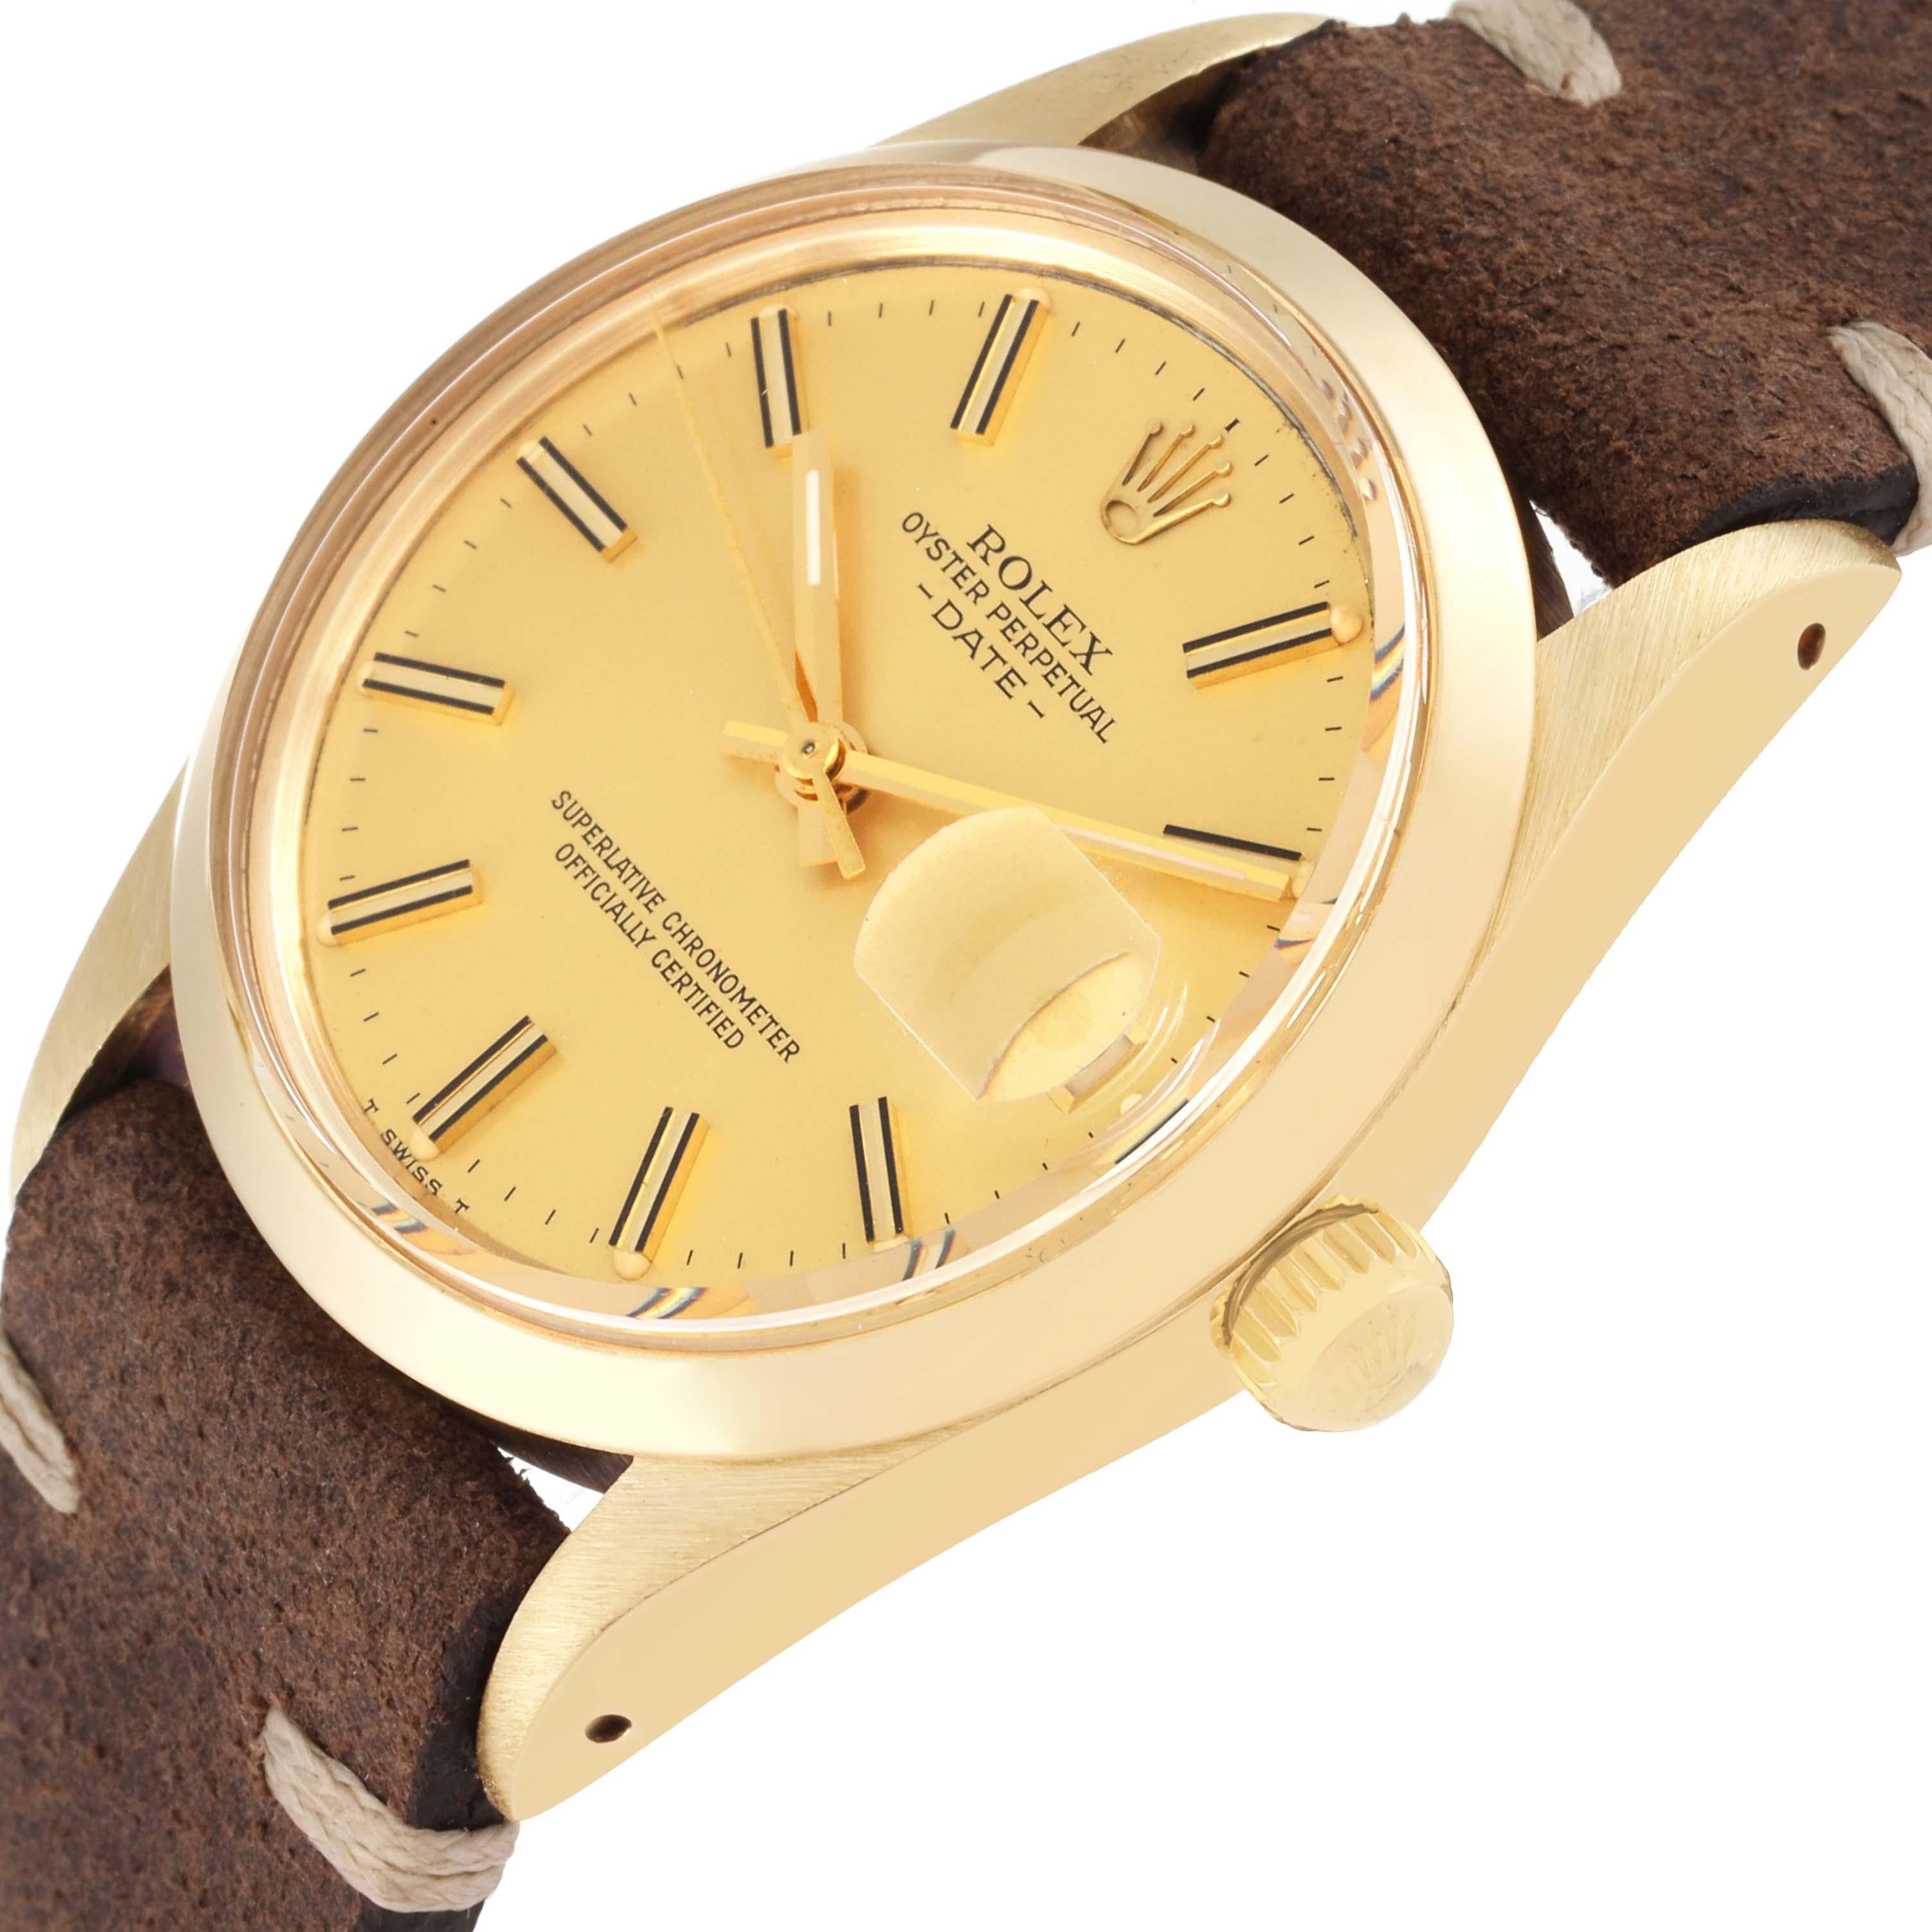 Rolex Date Yellow Gold Champagne Dial Leather Strap Vintage Mens Watch 15007 en vente 1